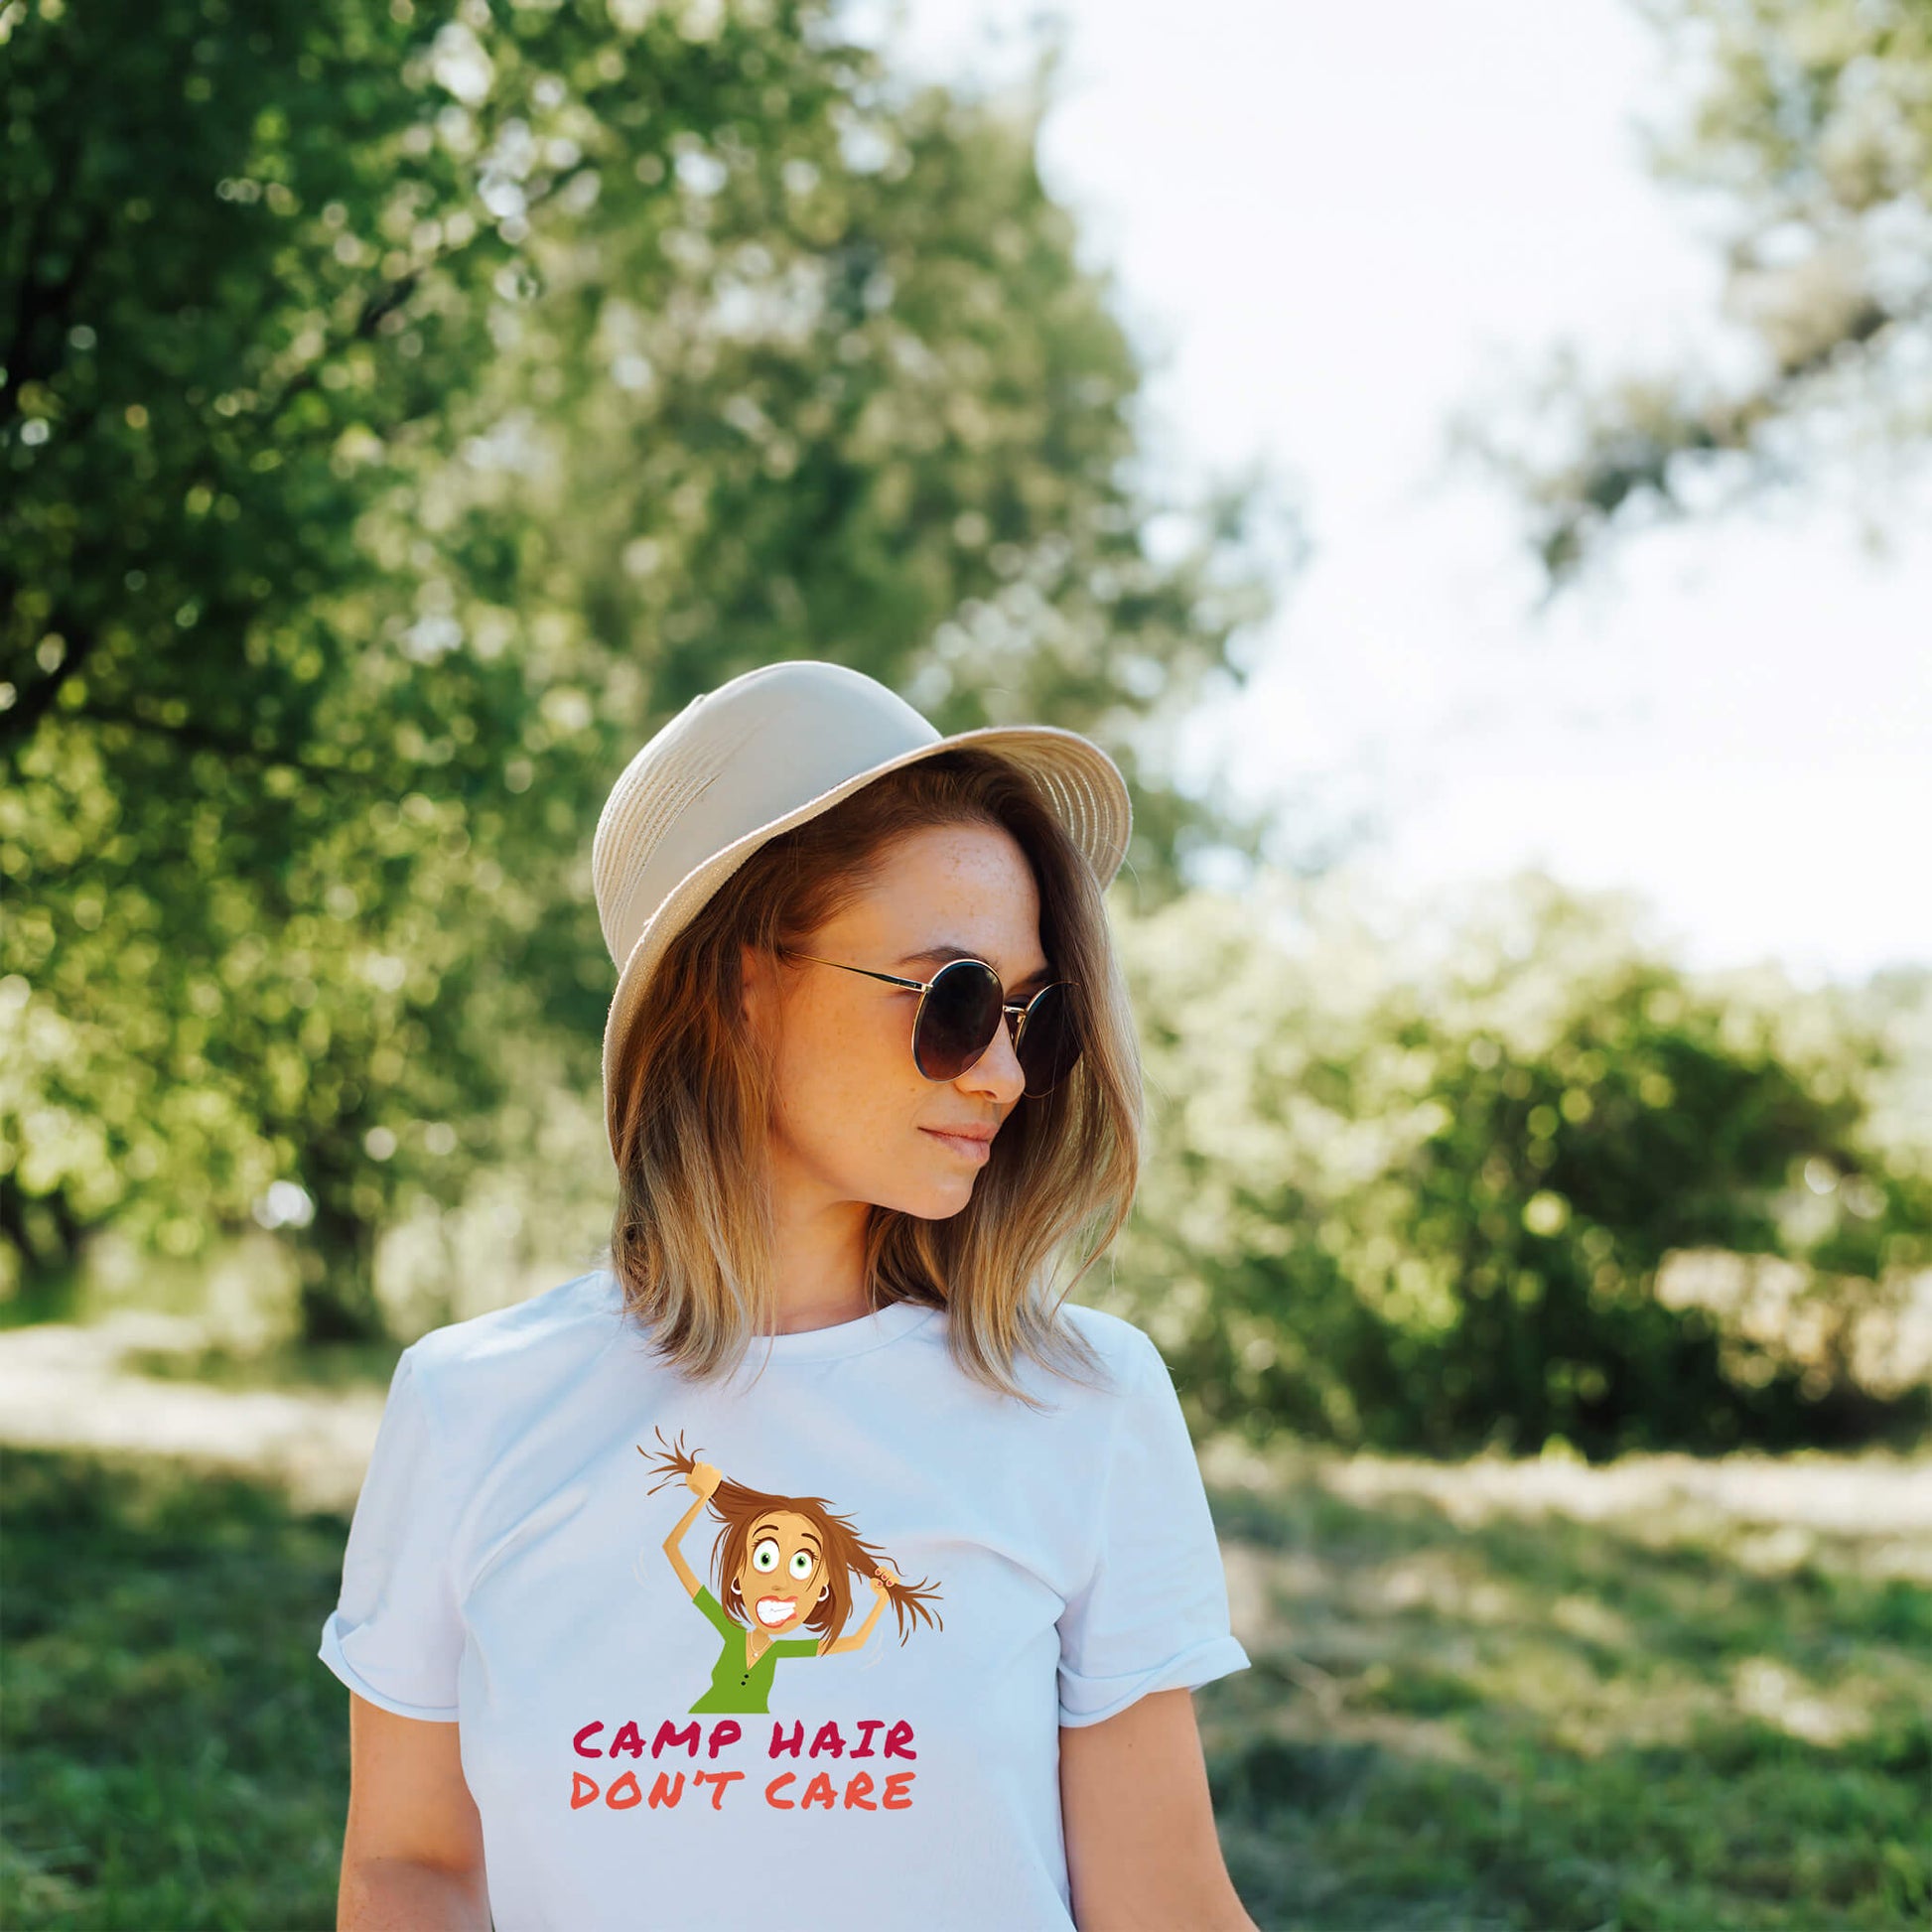 Embrace the Wild with our "Camp Hair Don't Care" Graphic T-Shirt - Your Go-To Outdoors Companion!